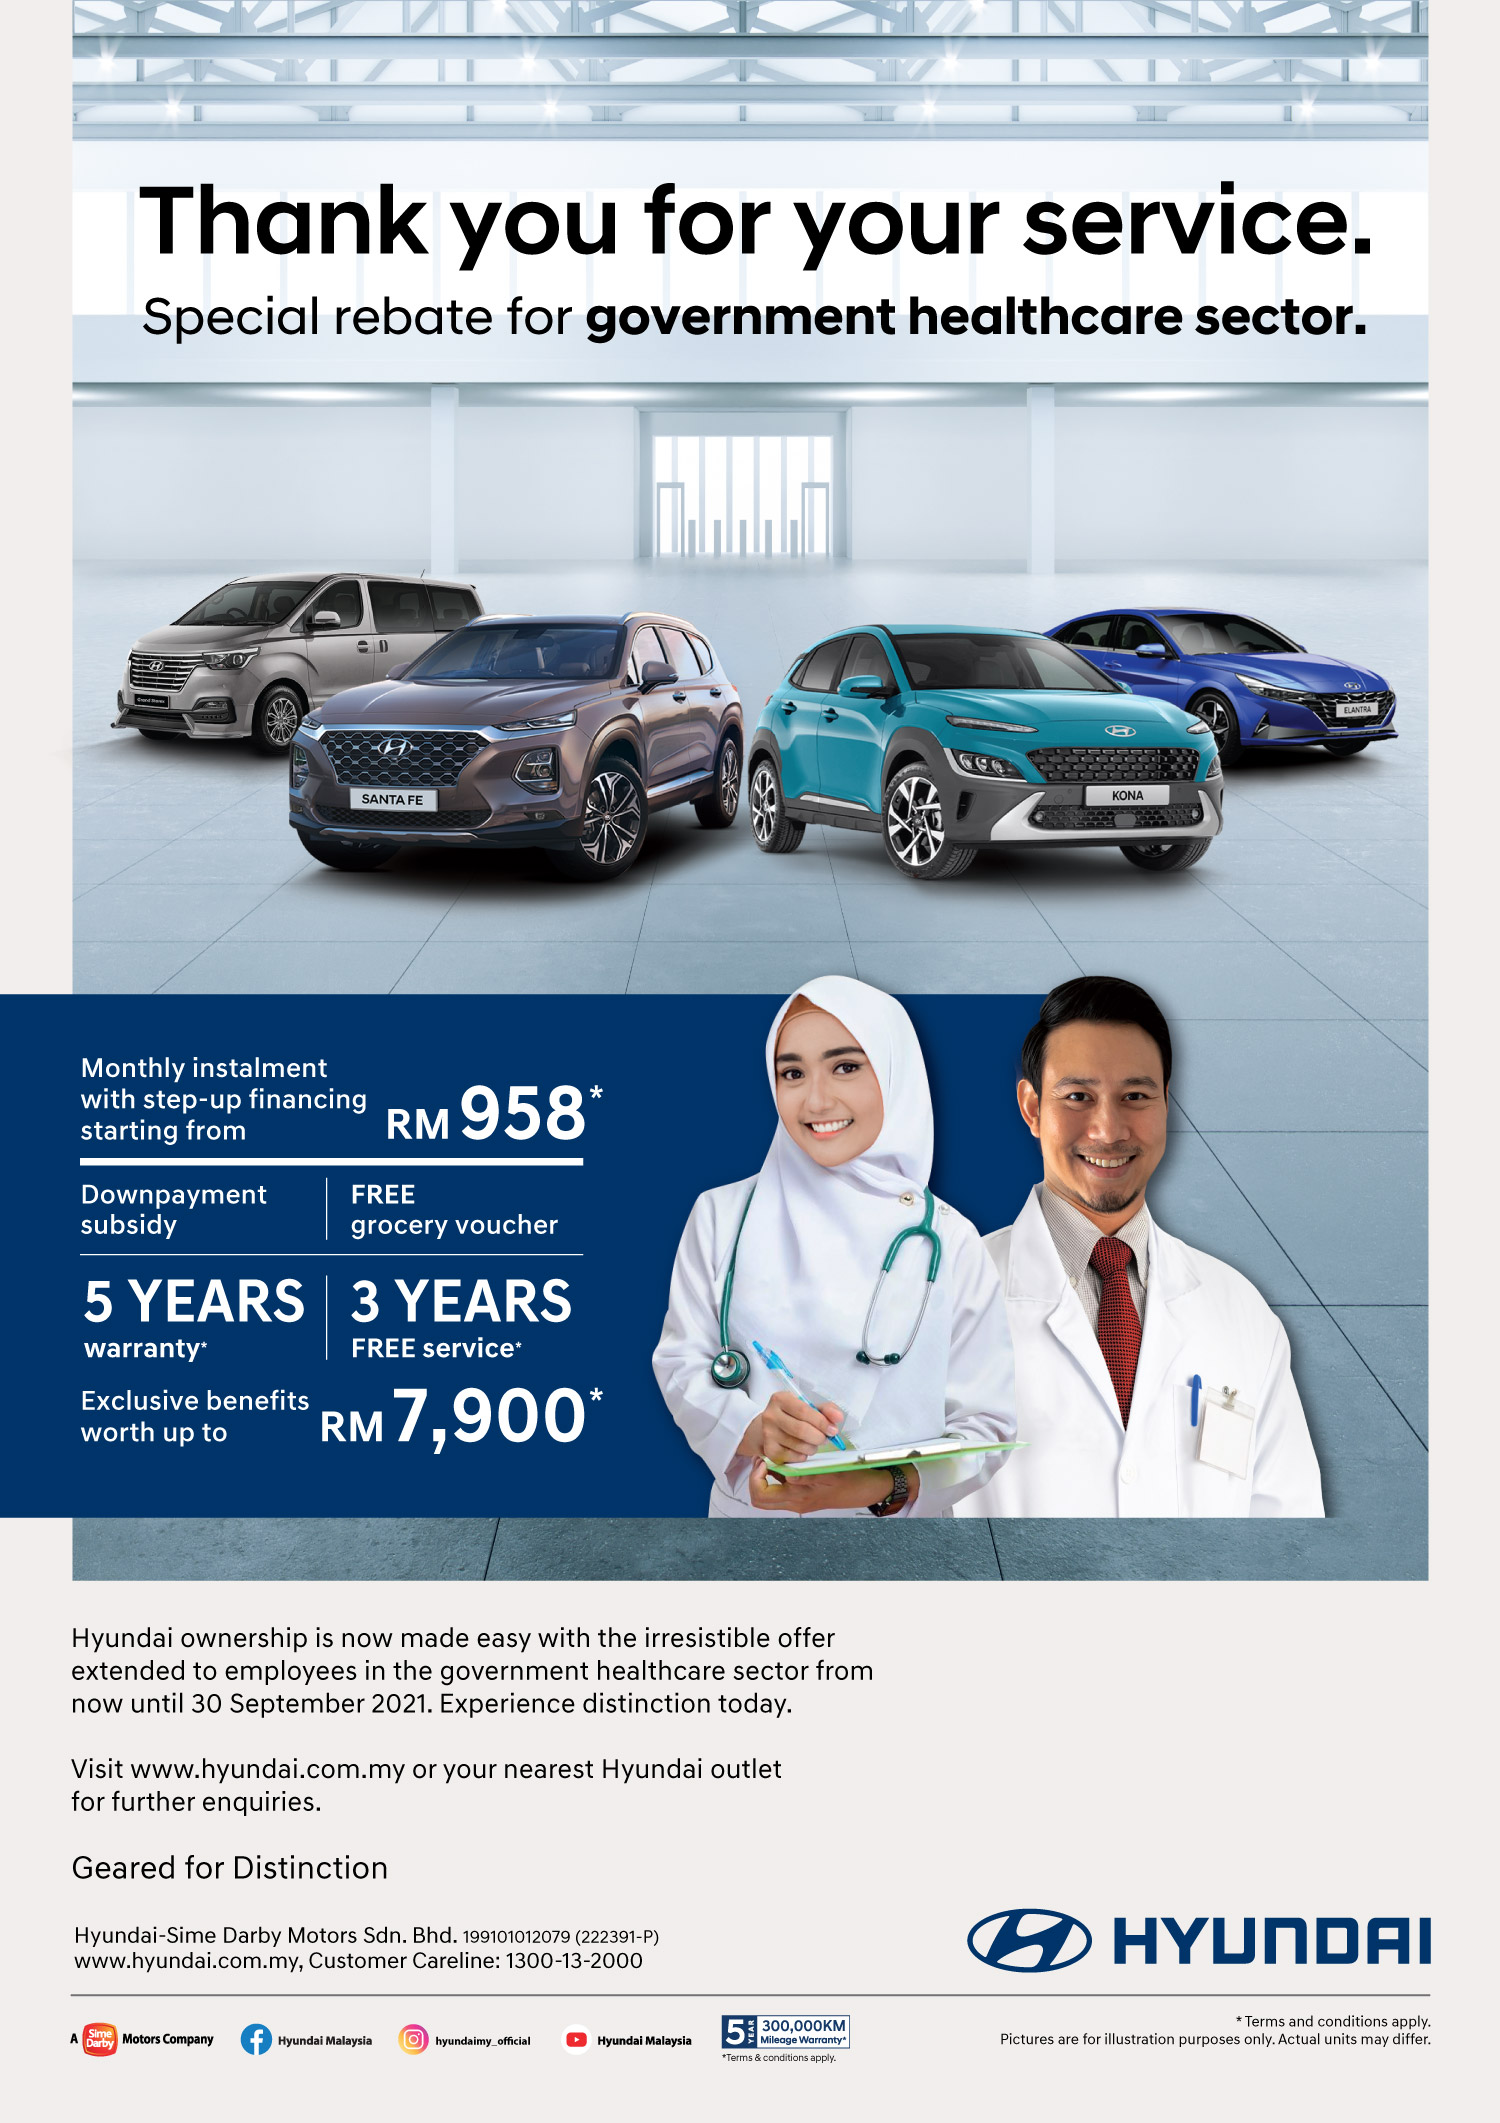 Thank you for your service. Special Rebate for Government Healthcare Sector. Monthly instalment with step-up financing starting from RM958* | Downpayment subsidy 5 years warranty* | Free Grocery voucher 3 years free services* | Hyundai ownership is now made easy with the irresistible offer extended to employees in the government healthcare sector from now until 30 September 2021. Experience distinction today. Visit www.hyundai.com.my or your nearest Hyundai outlet for further enquiries. Exclusive benefits worth up to RM7,900* Terms and Conditions apply.